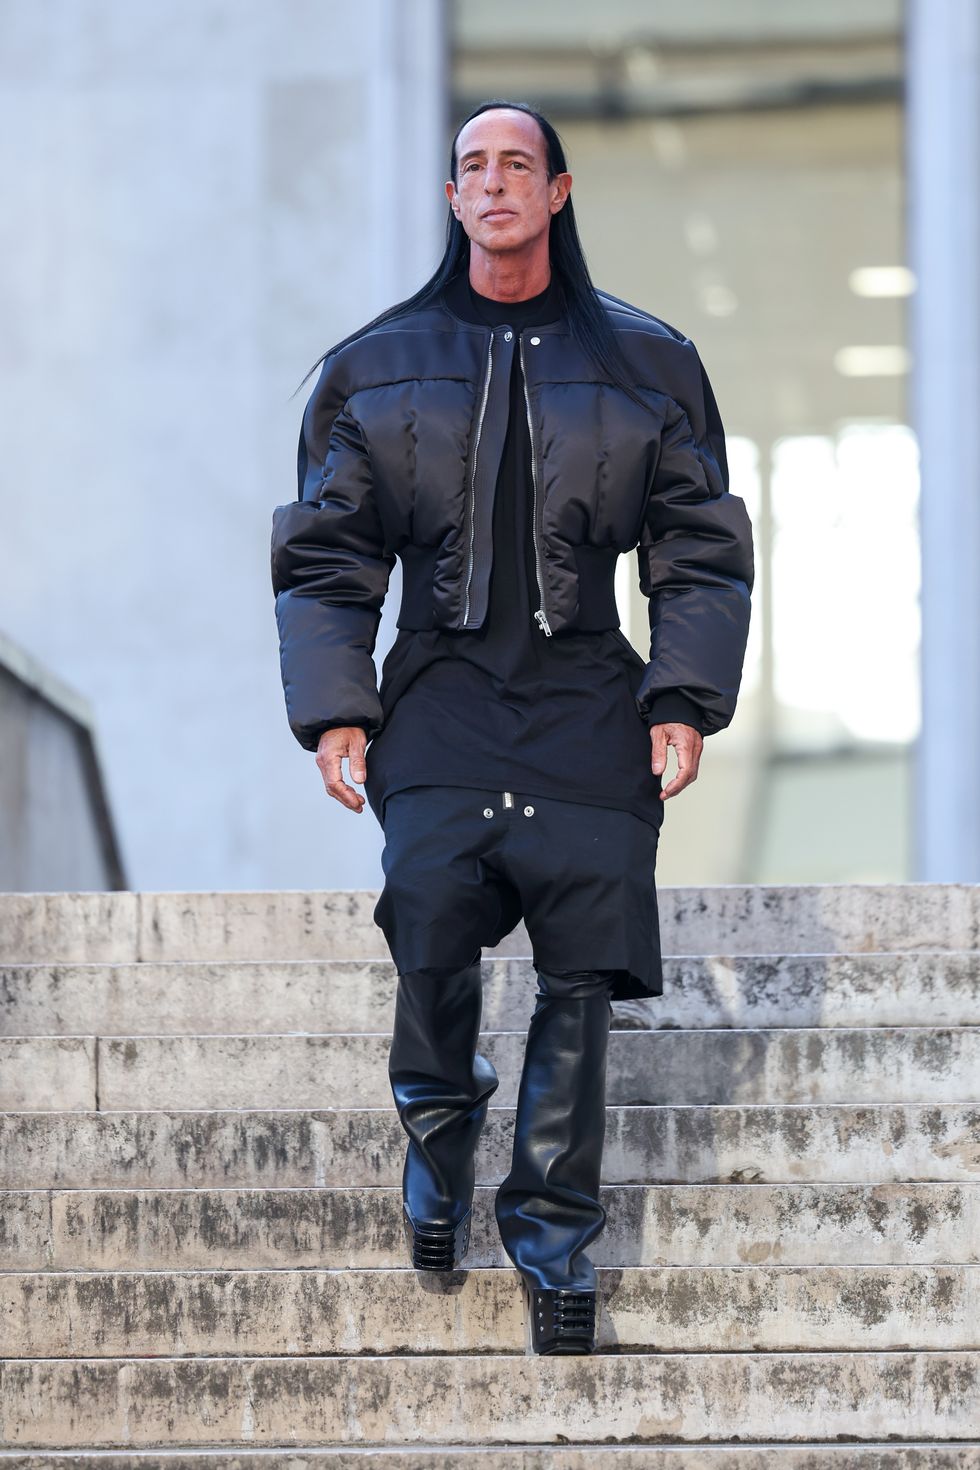 Rick Owens on Fashion, His Signature Aesthetic, and Dr. Martens